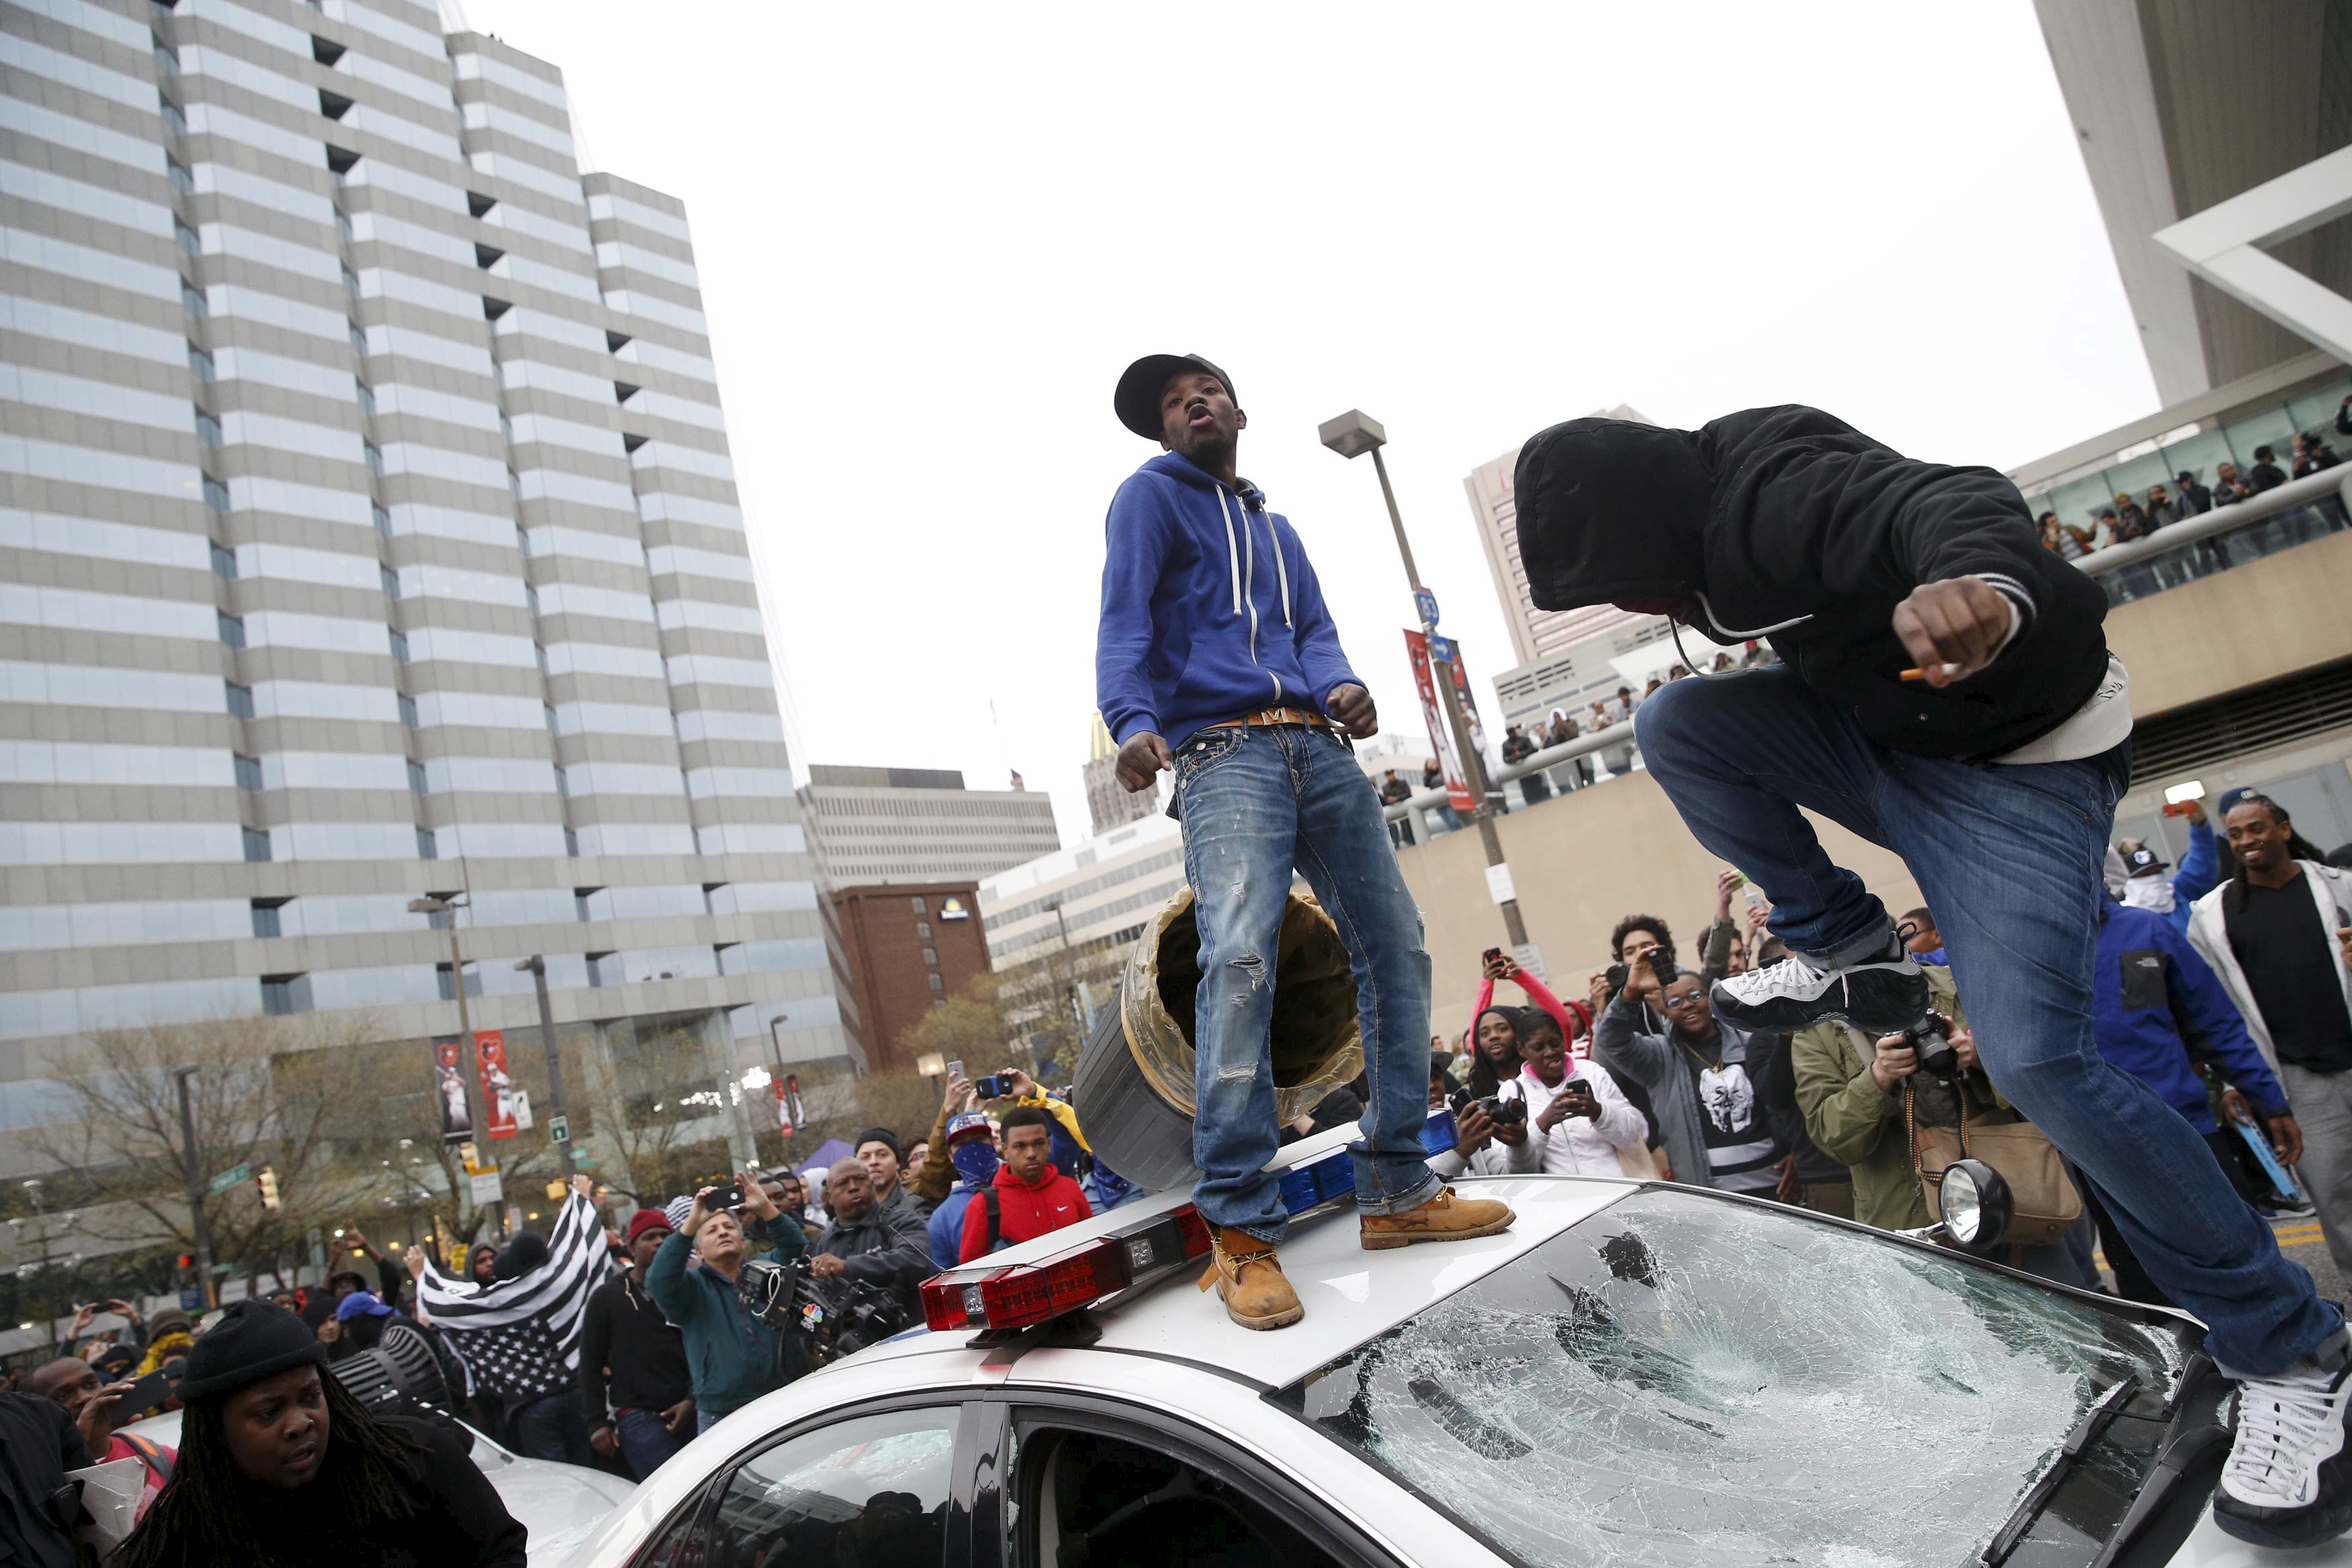 Protesters jump on a police car at a rally to protest the death of Freddie Gray who died following an arrest in Baltimore